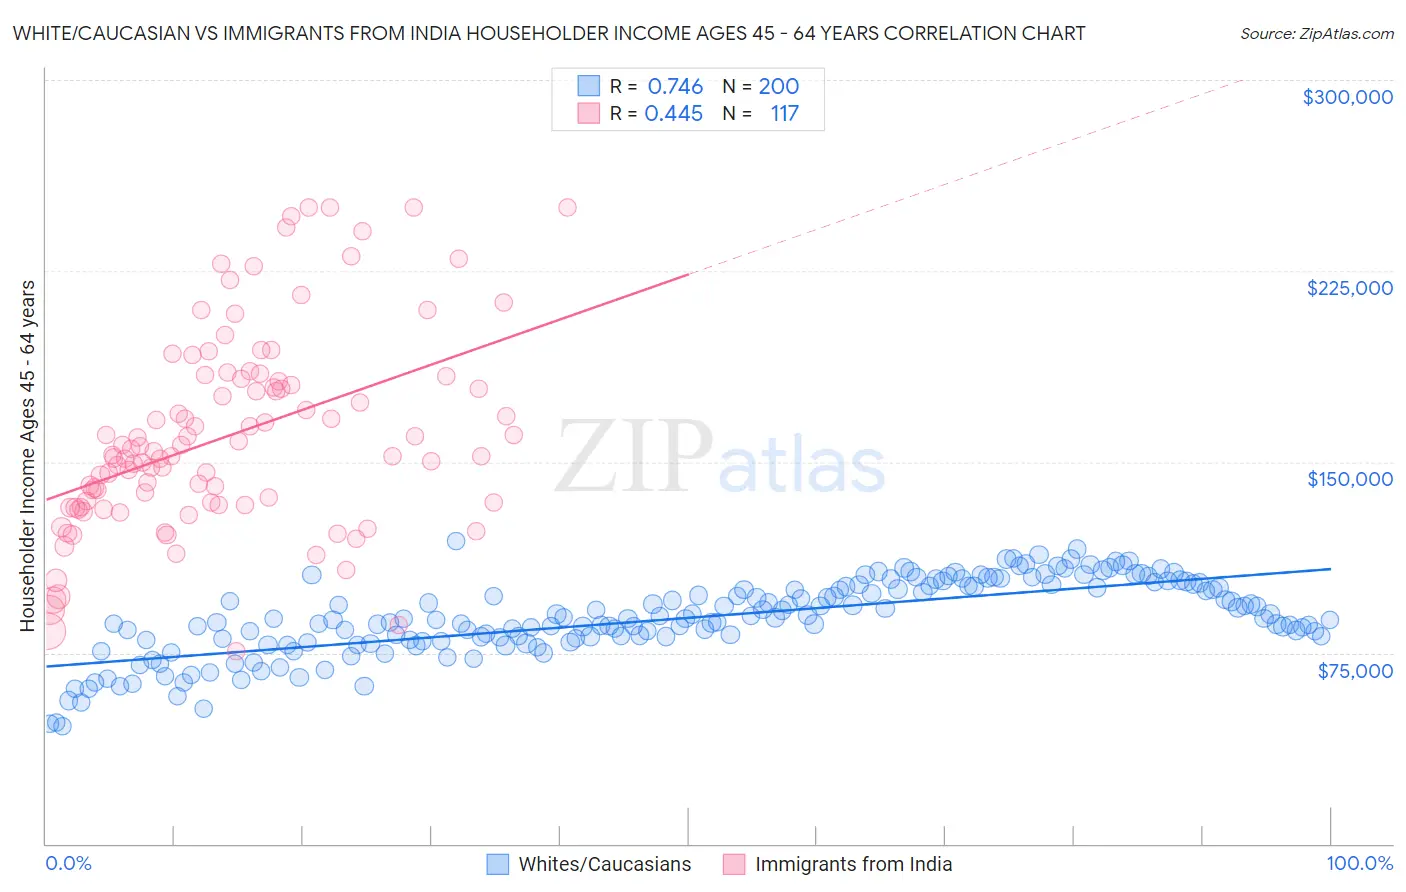 White/Caucasian vs Immigrants from India Householder Income Ages 45 - 64 years